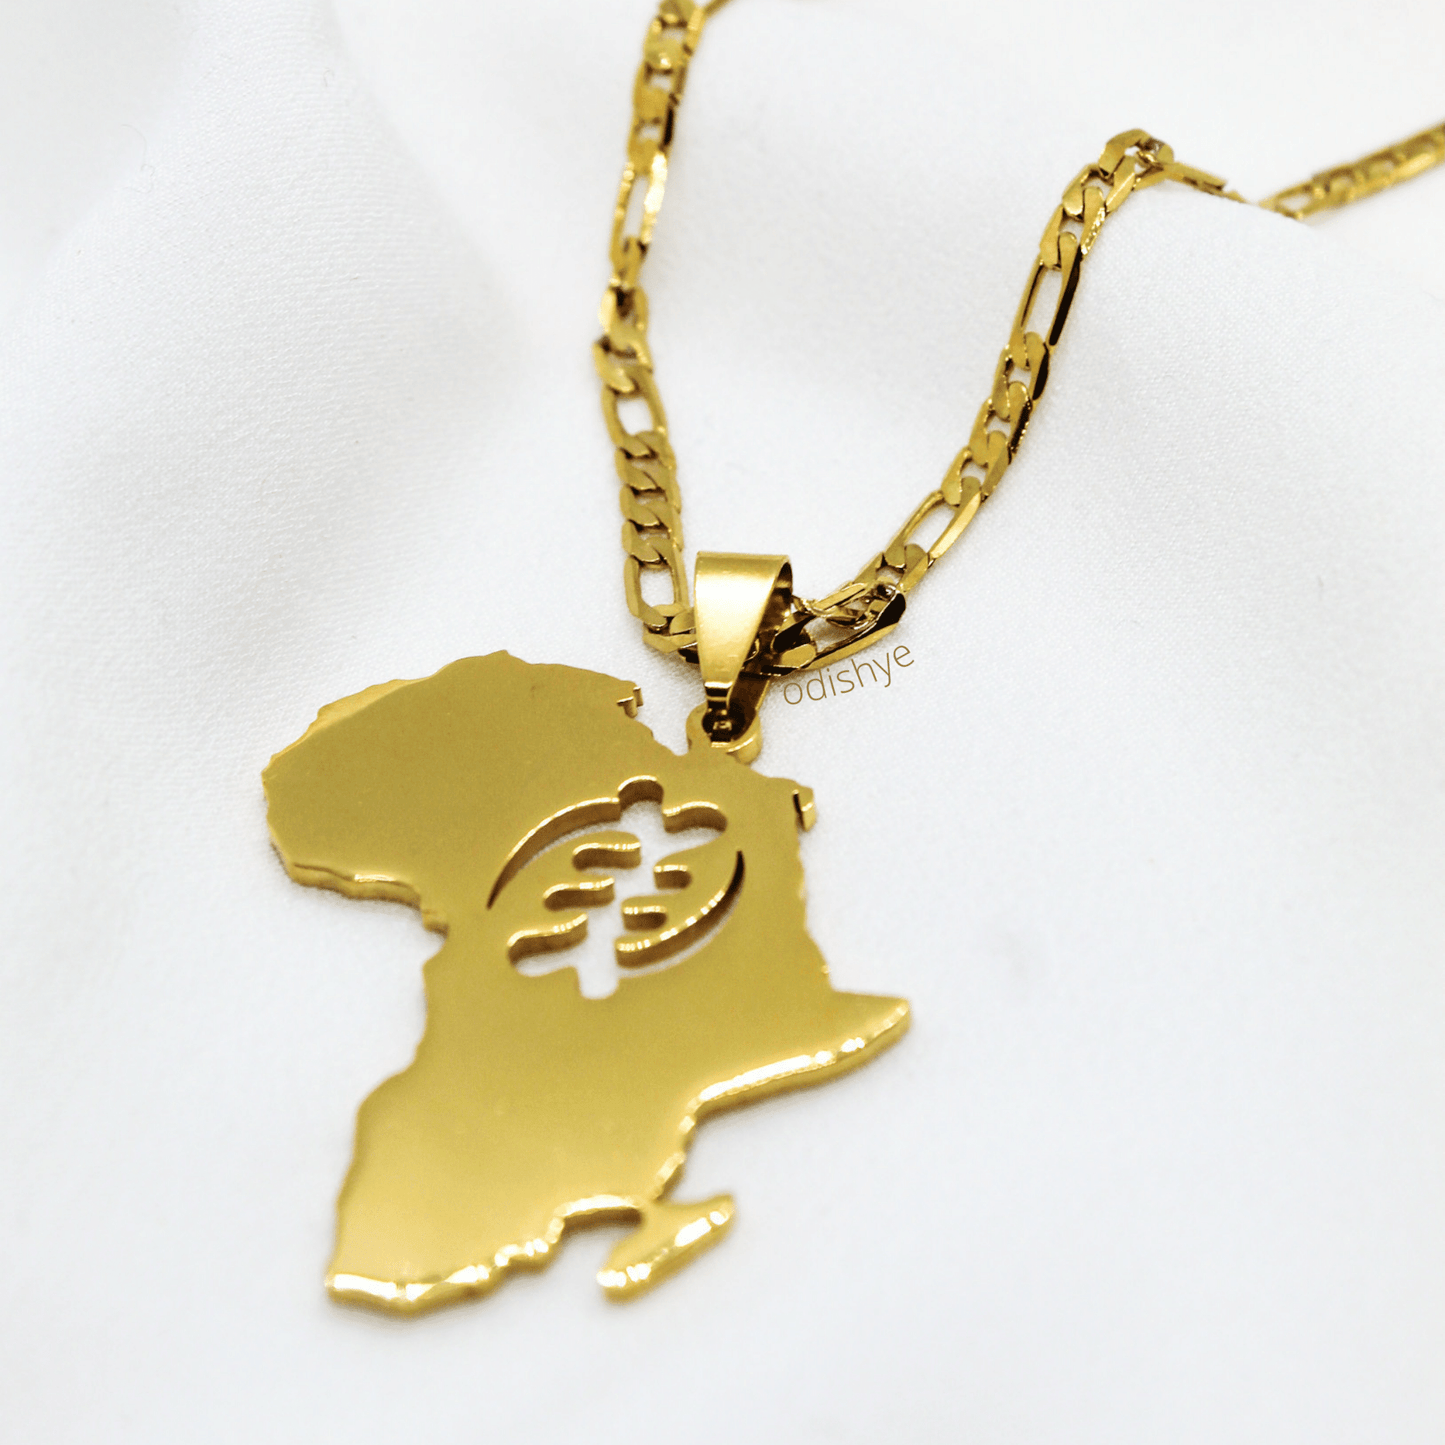 The Gye Nyame necklace is a simple yet elegant necklace celebrating Africa and its glory. The Gye Nyame symbol has been carefully sculpted at the centre of Africa and dipped in 18k gold plating.